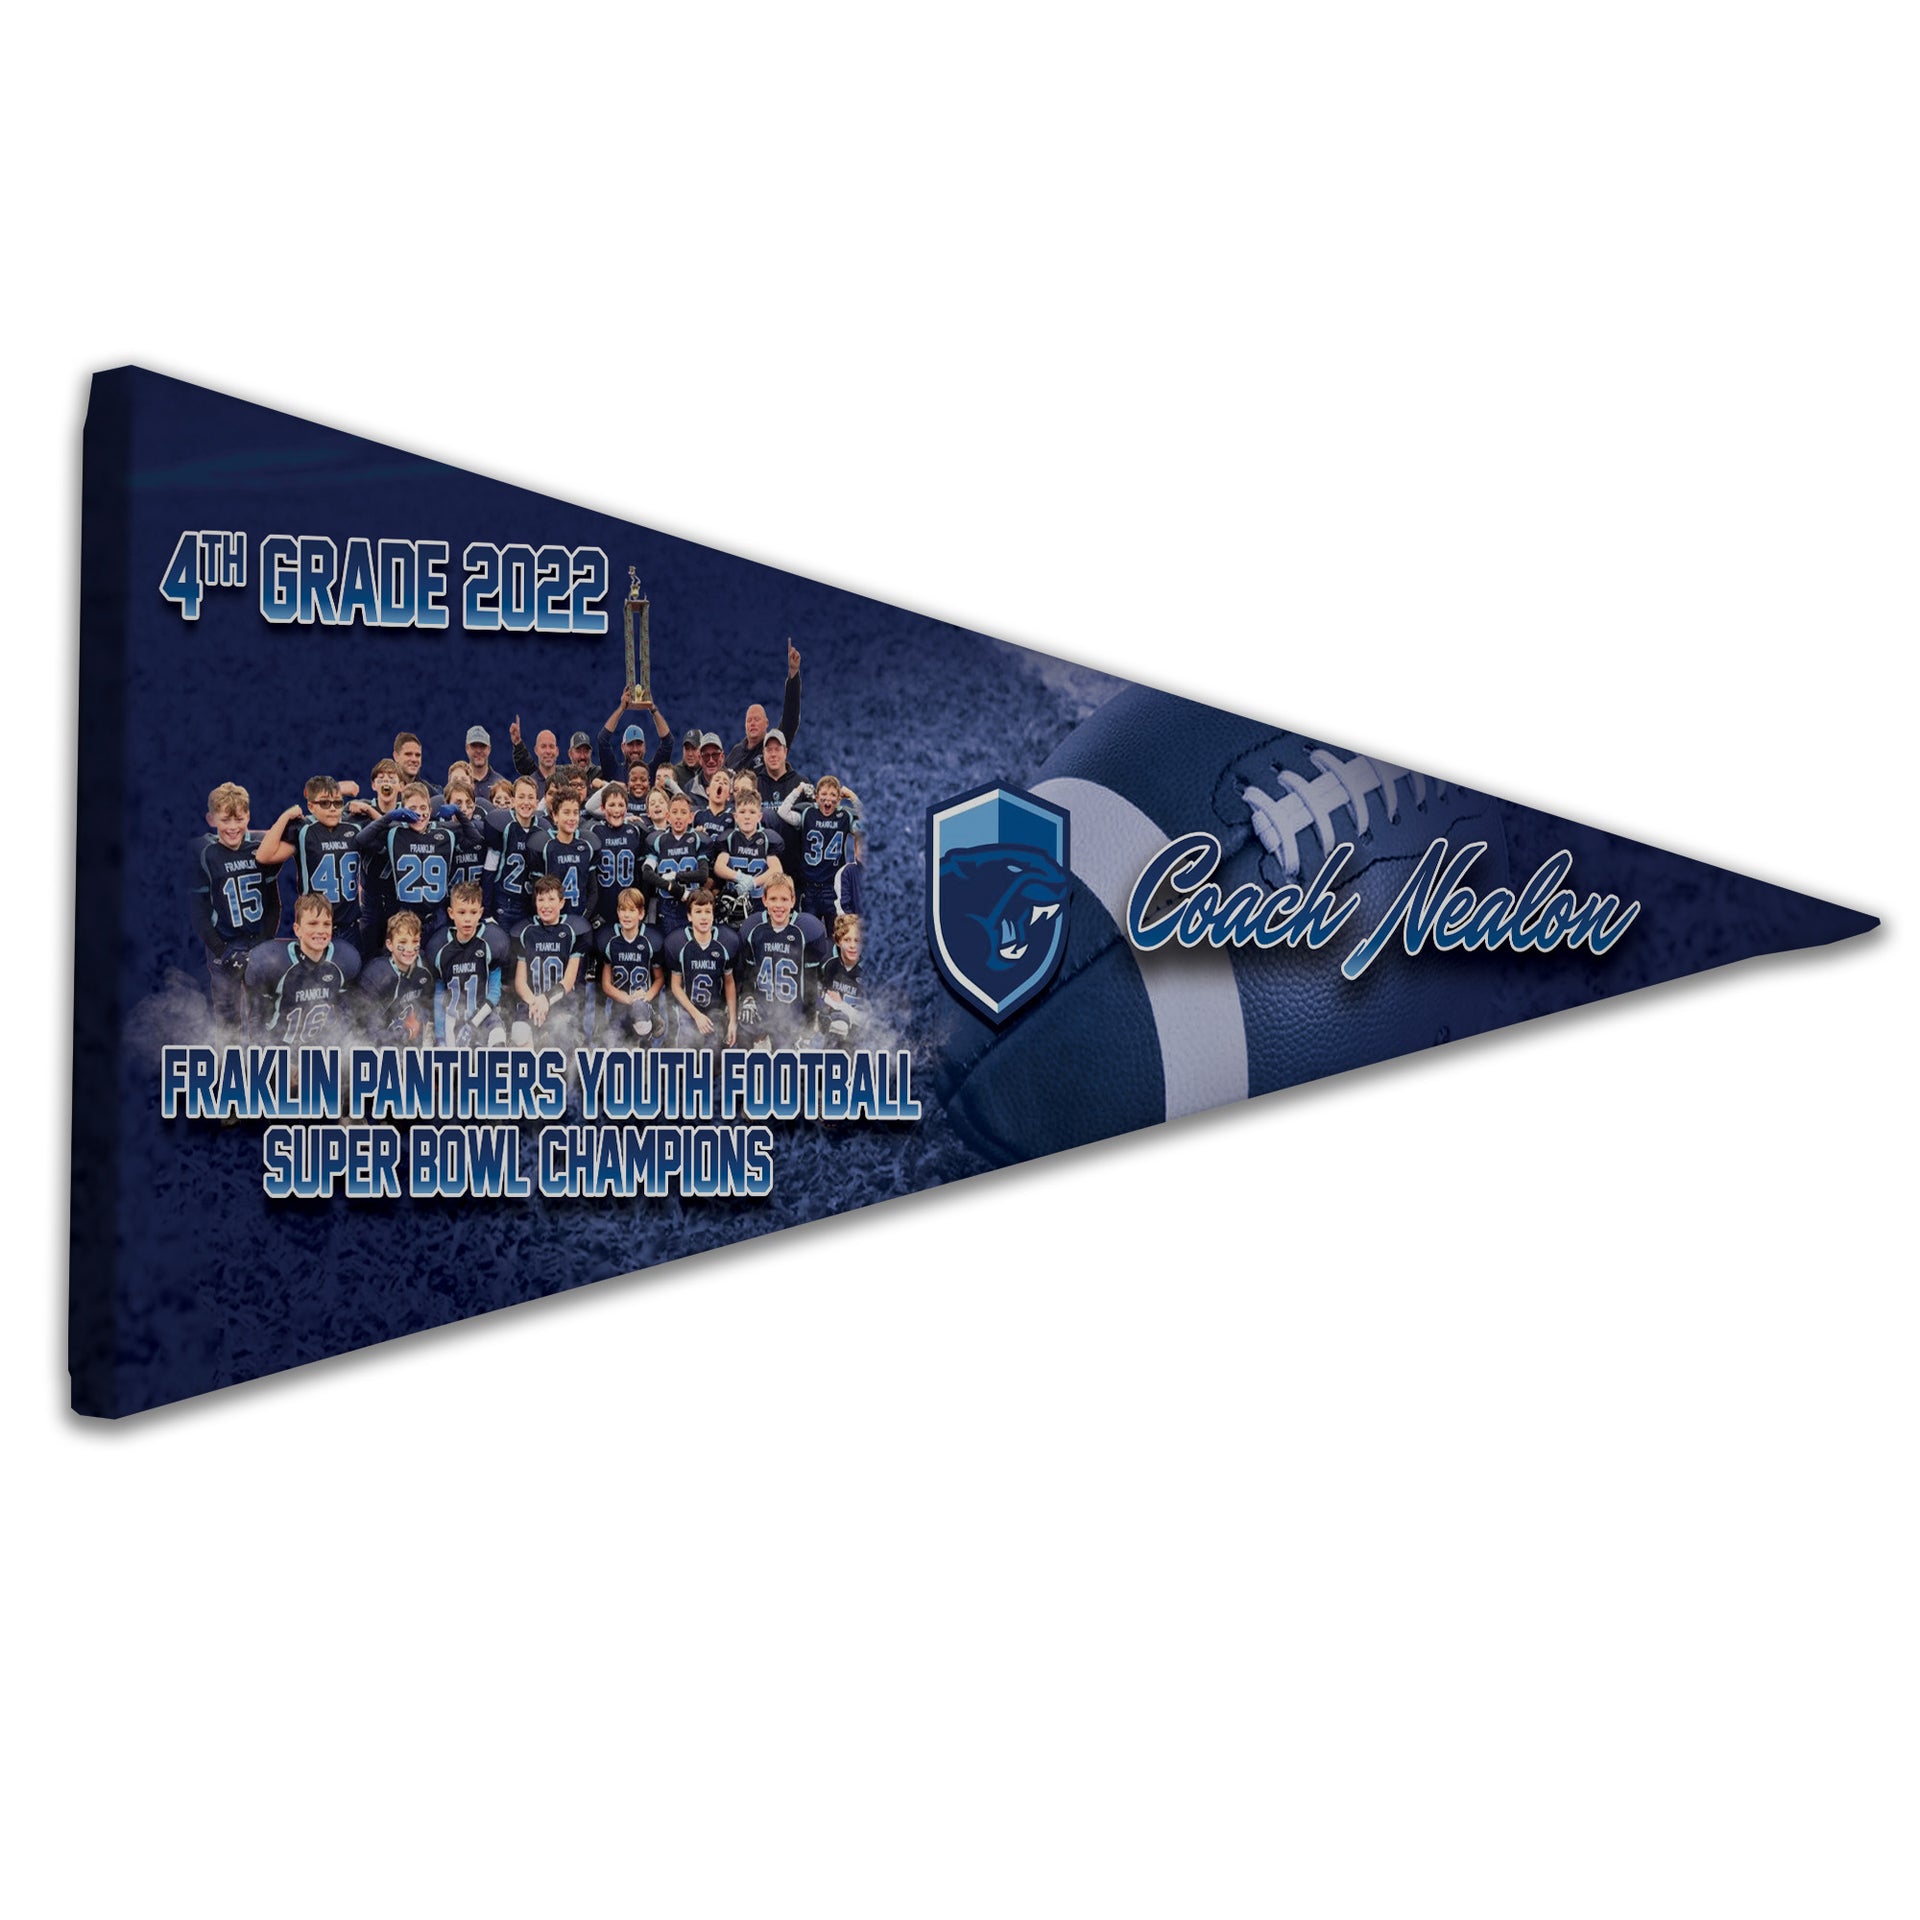 Collectible Canvas Team Spotlight Style for Coach Nealon of the Franklin Panthers Youth Football Program